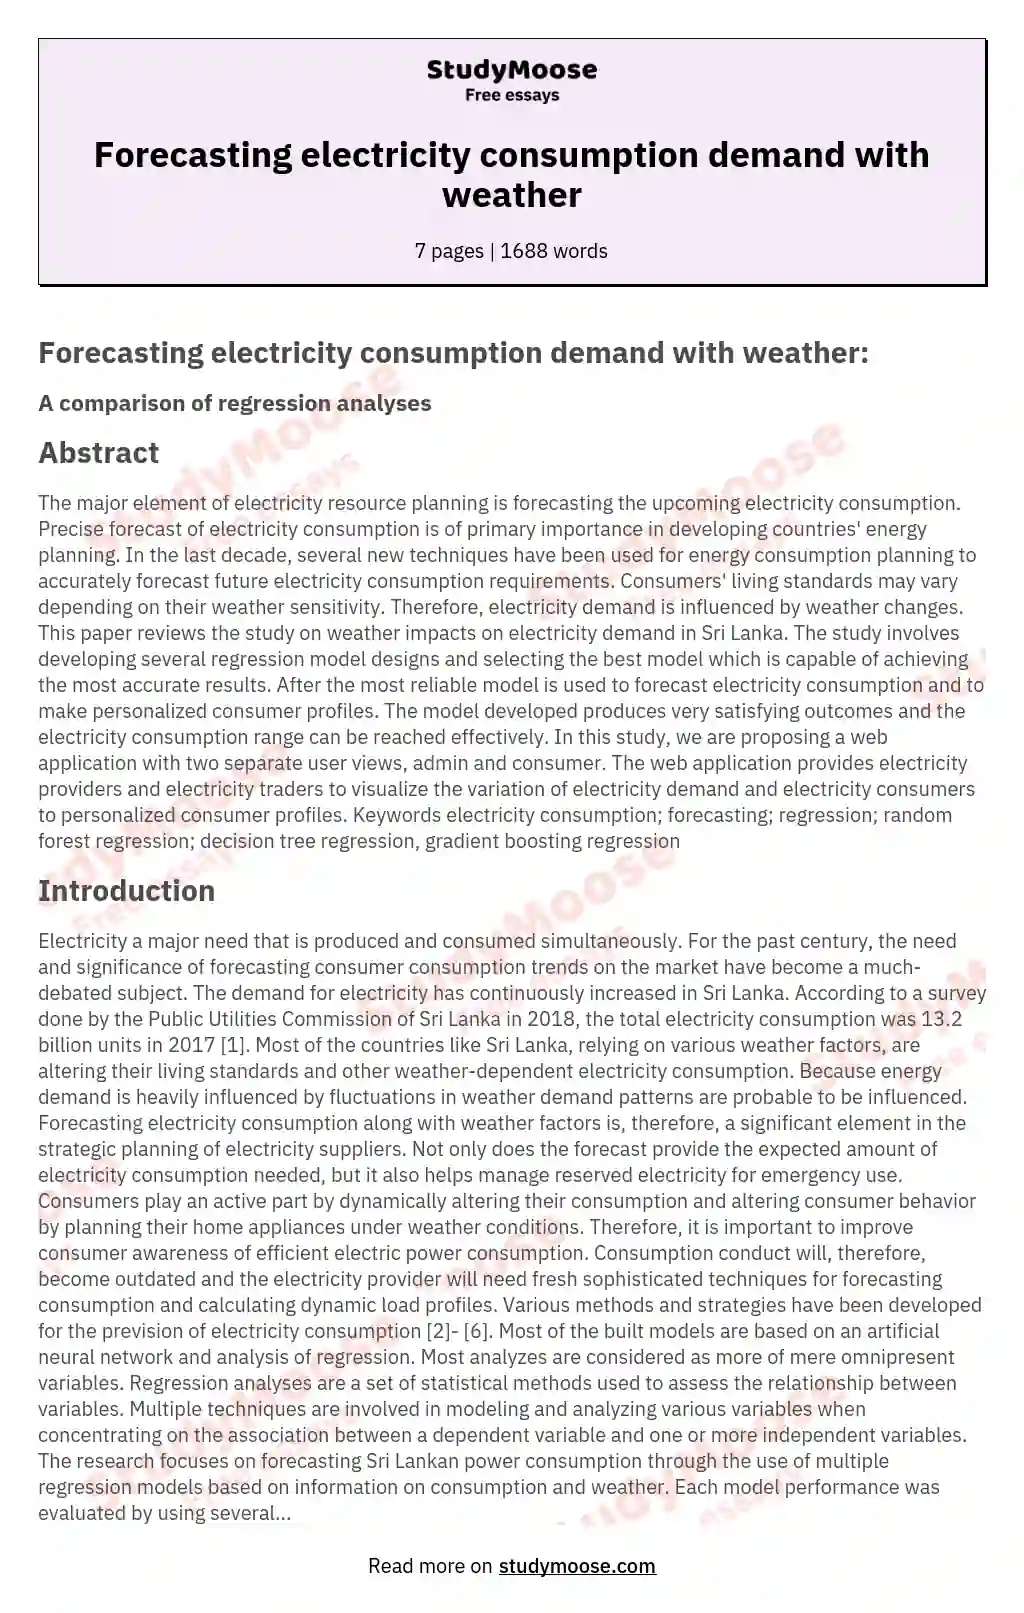 Forecasting electricity consumption demand with weather essay